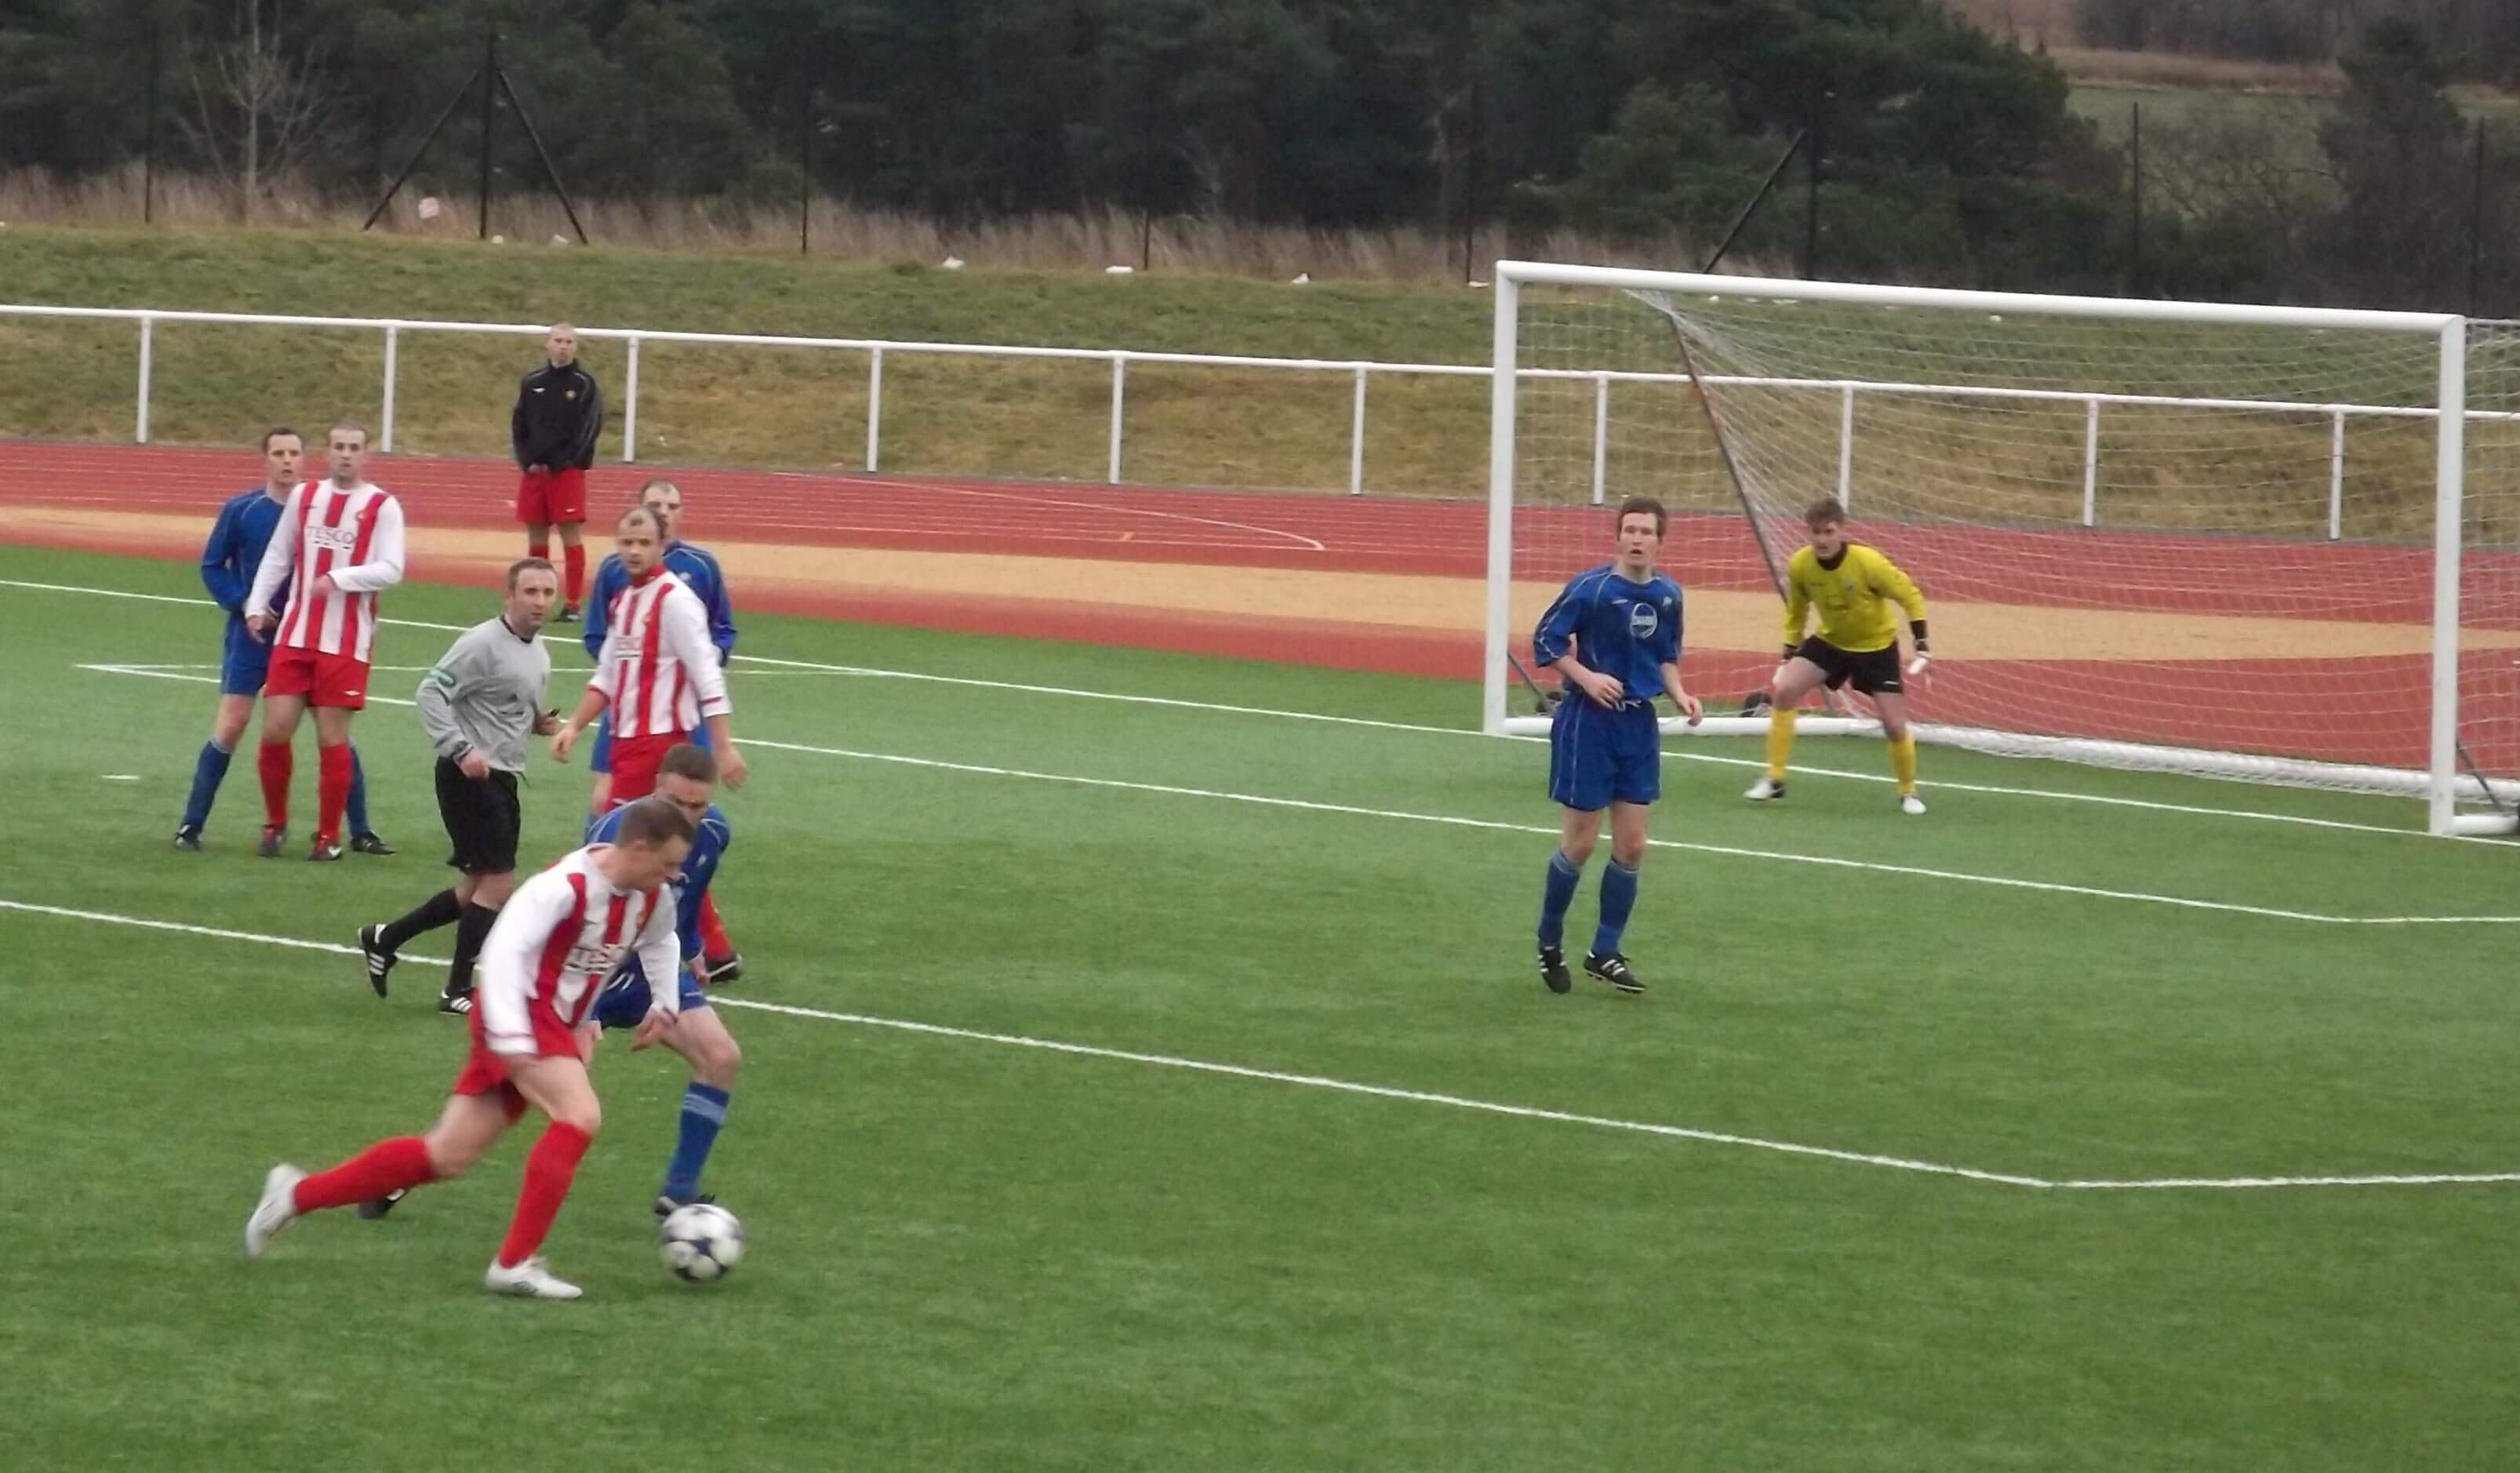 Mark McKeever makes a run for Thistle in the first half at Carluke